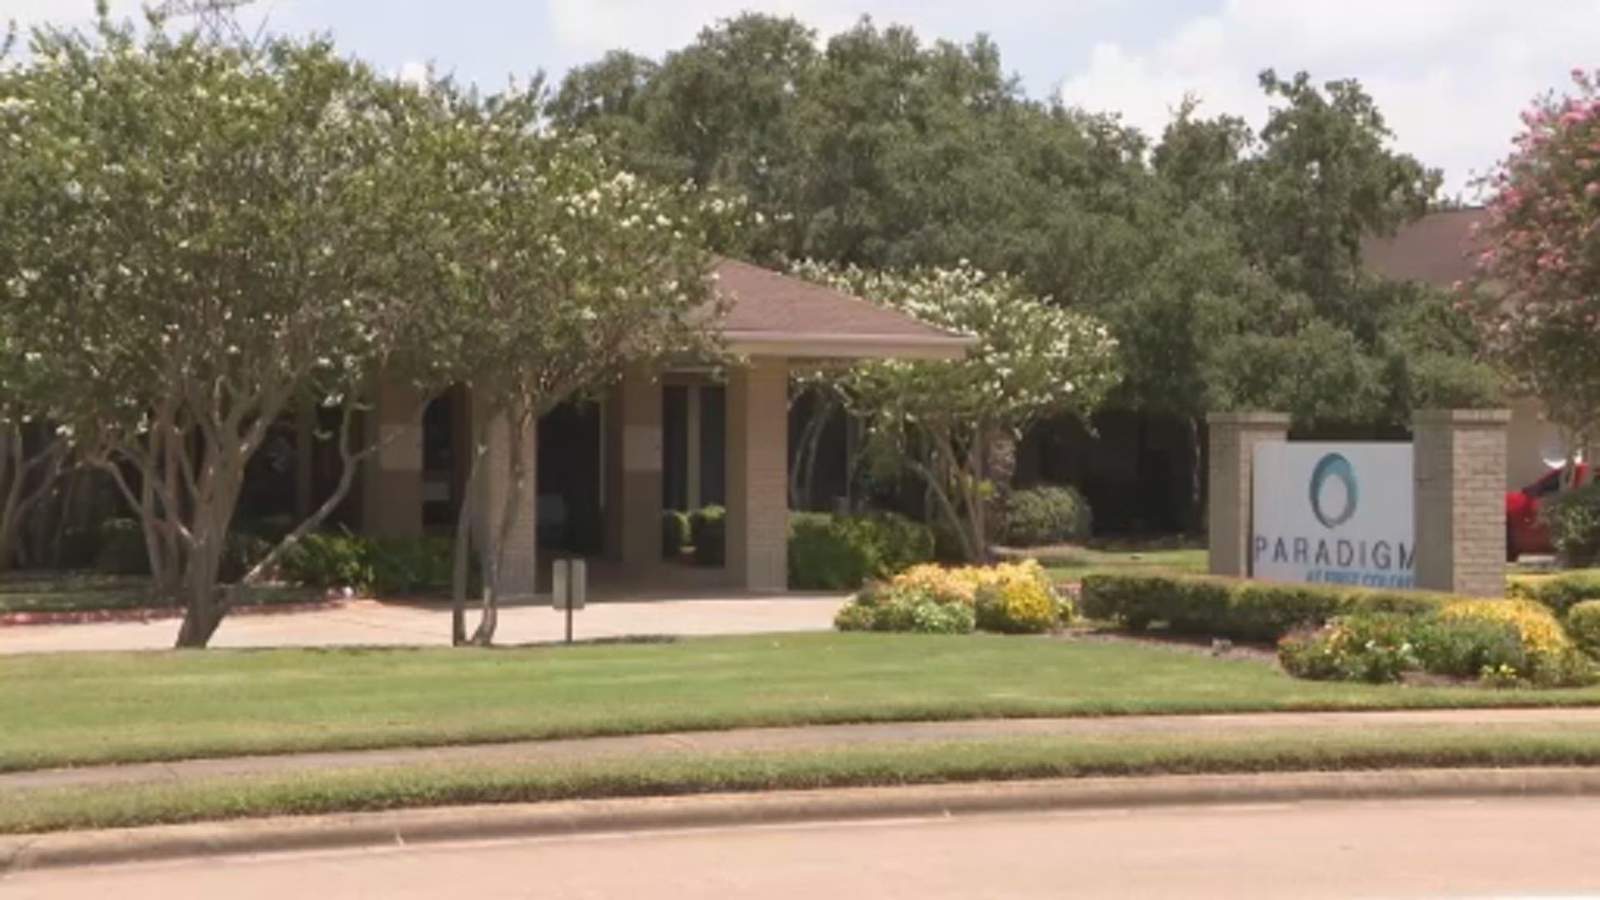 ‘It’s really getting out of hand': COVID-19 outbreak reported at Missouri City nursing home